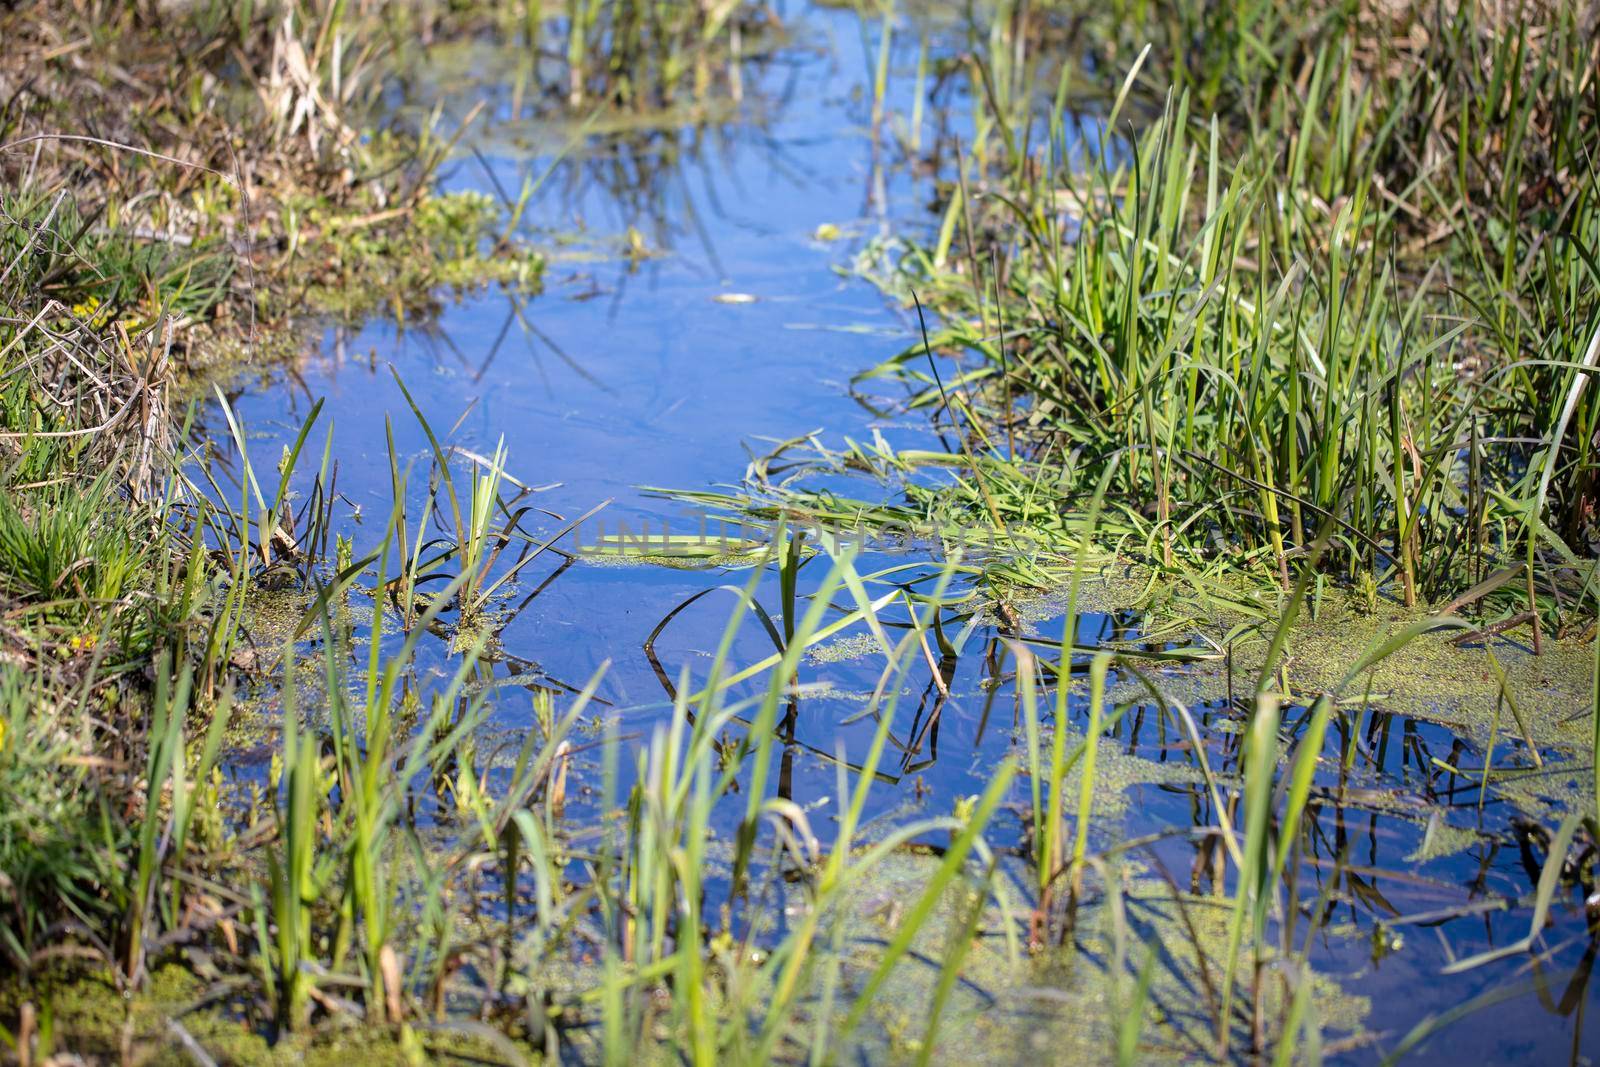 A small blue river or stream surrounded by green grass.